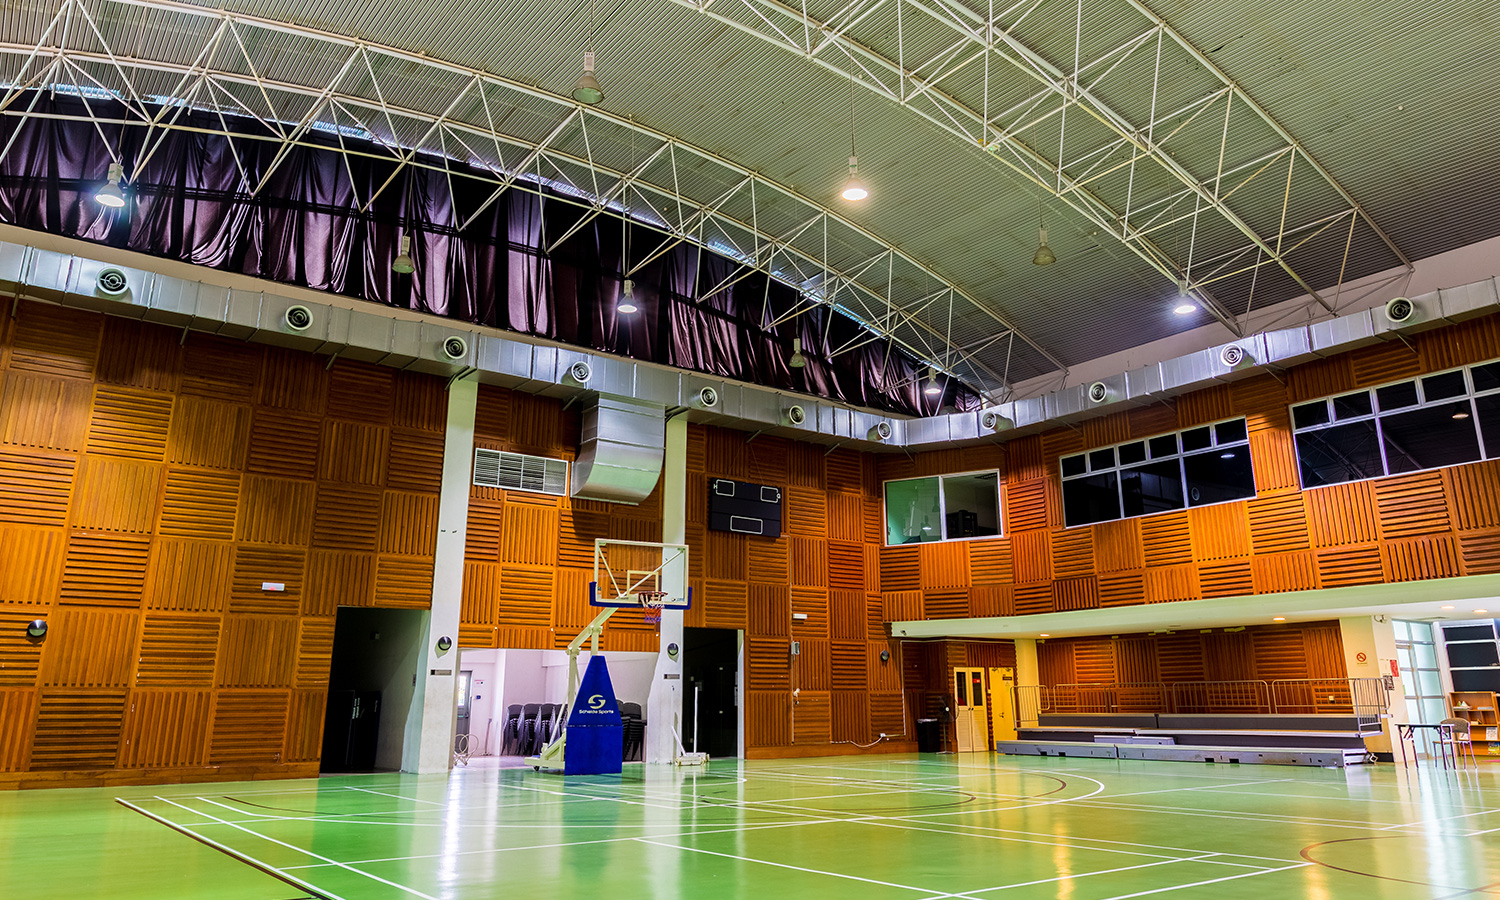 Multi-Purpose Hall with recreational facilities such as a basketball court, squash courts, badminton courts and a gym.